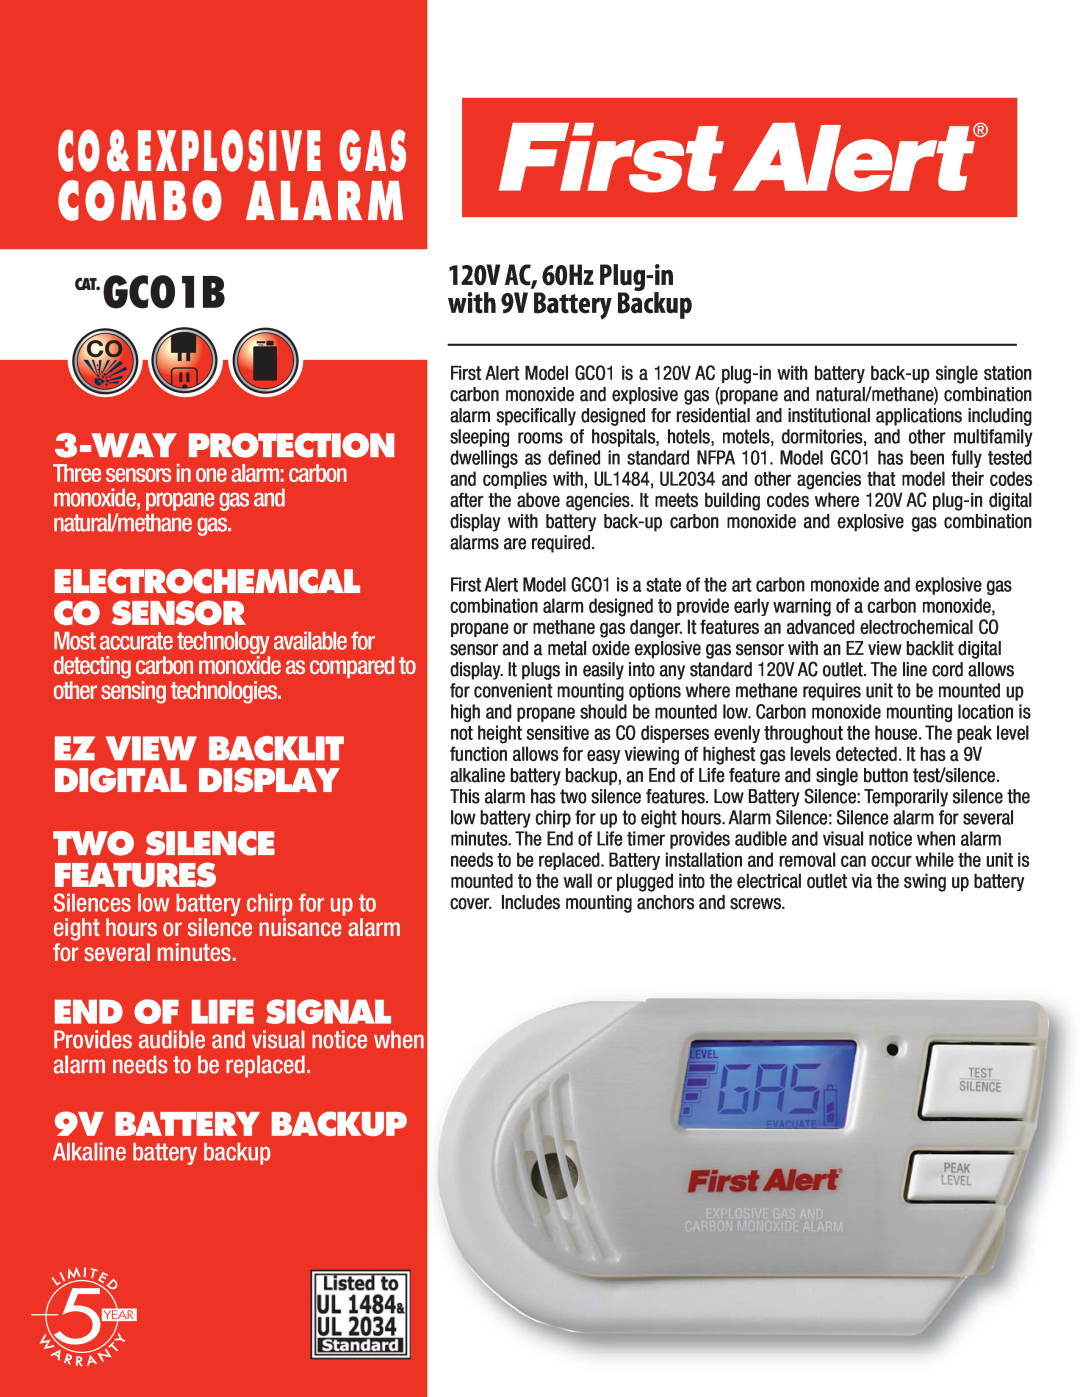 First Alert GC01B manual Combo Alarm, CAT.GCO1B, Co&Explosive Gas, Way Protection, End Of Life Signal, 9V BATTERY BACKUP 